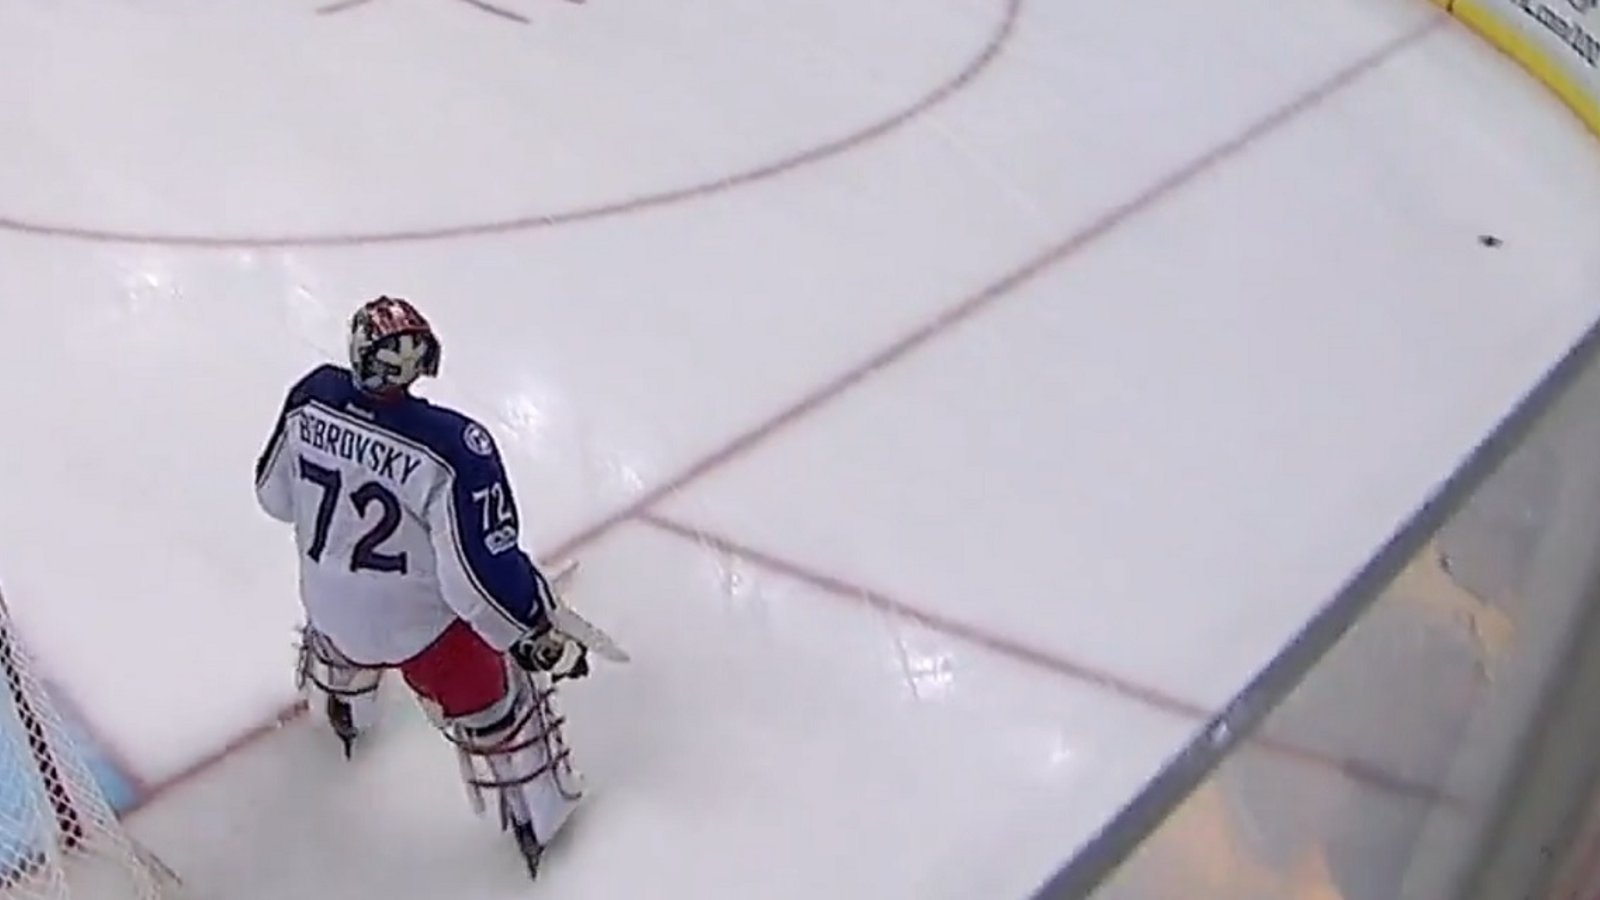 HUGE mistake from Bobrovsky gives Crosby his 50th career playoff goal.